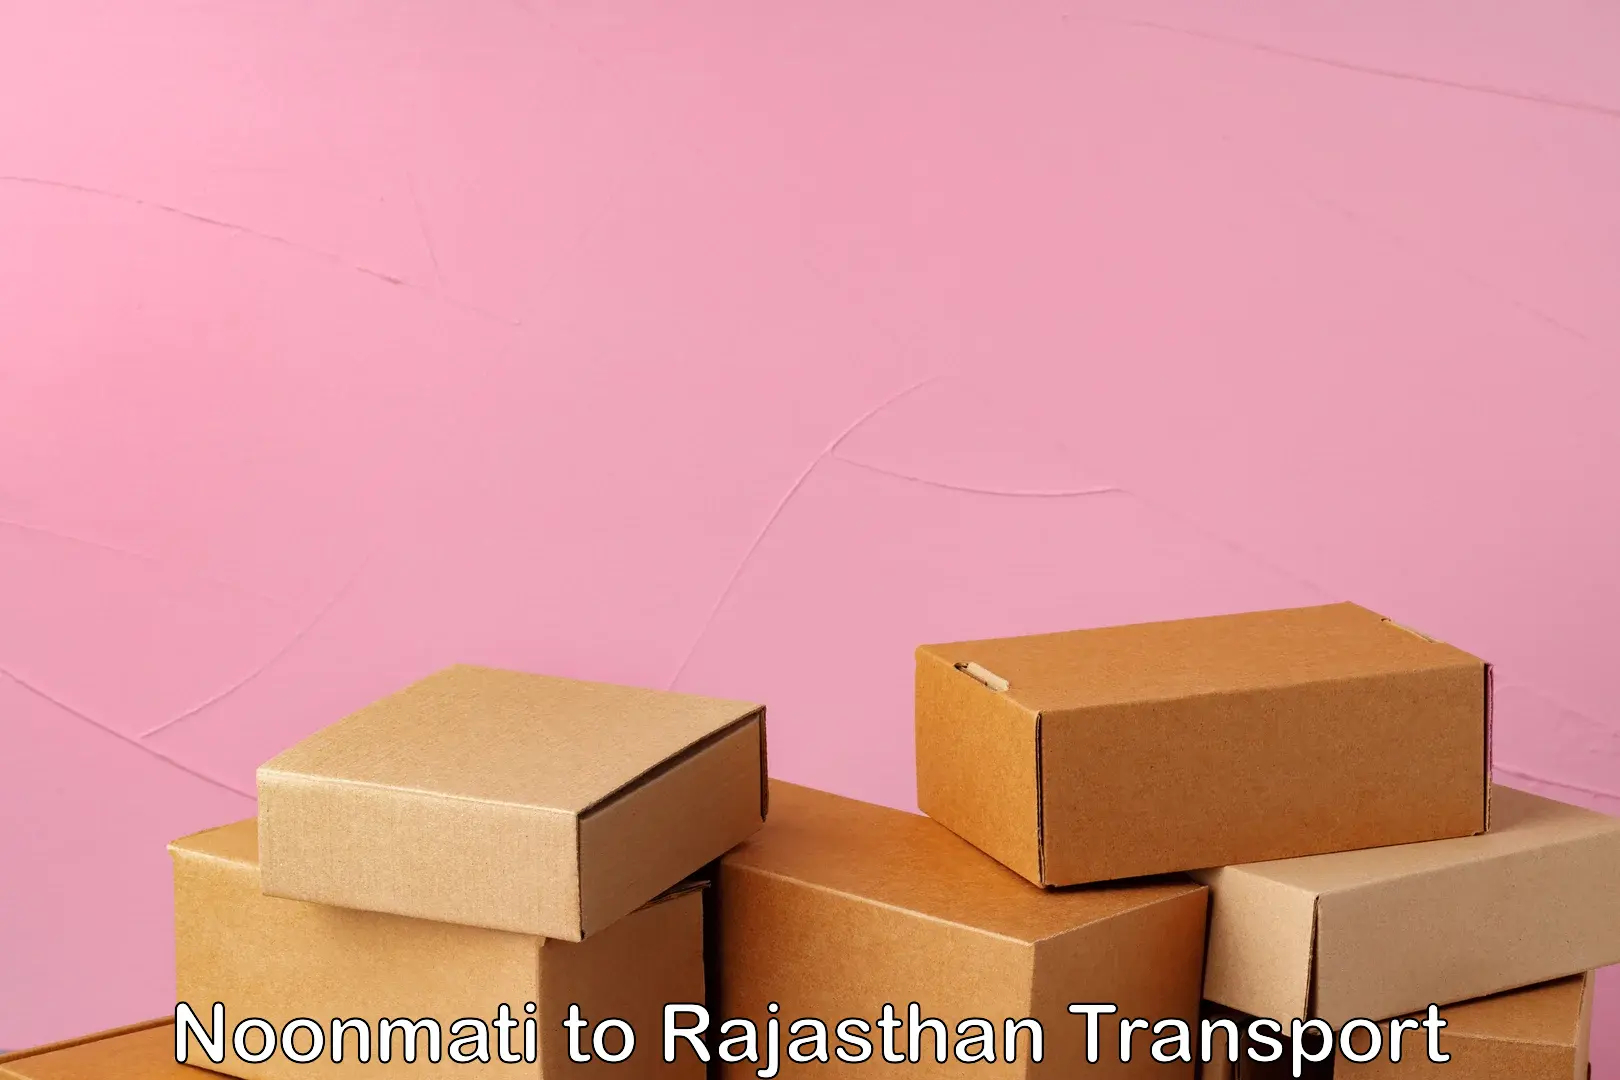 Truck transport companies in India Noonmati to Yeswanthapur